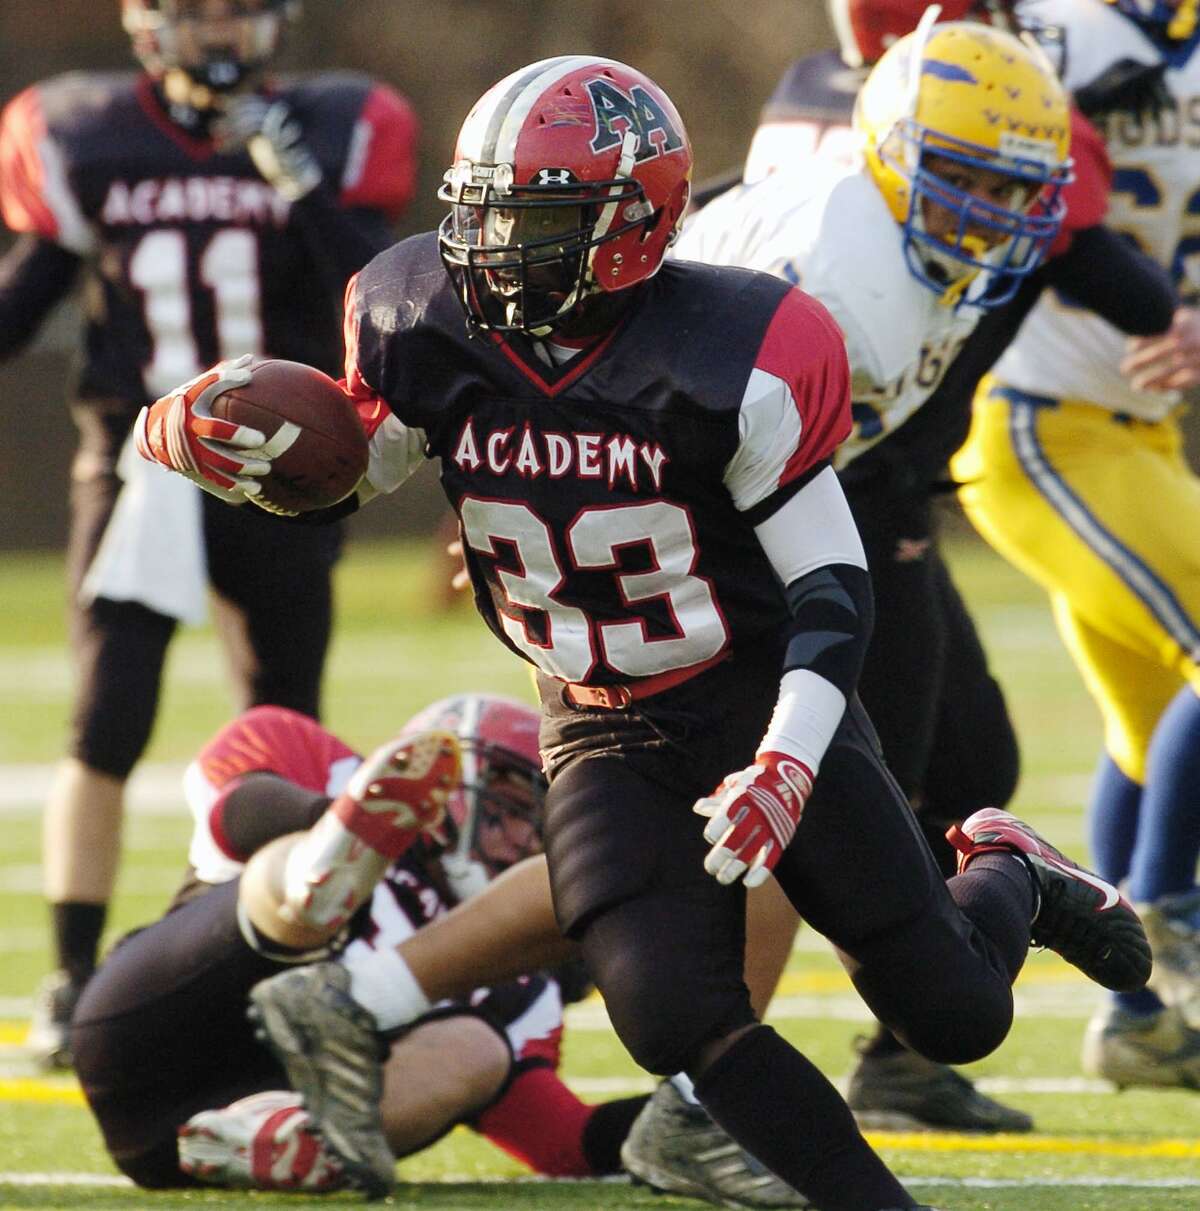 Times Union Photo by James Goolsby-Nov.4, 2006-Albany Academy #33-RB-Dion Lewis runs through a big hole in the Hudson defense. In the first half of the Class C Superbowl in Amsterdam N.Y.